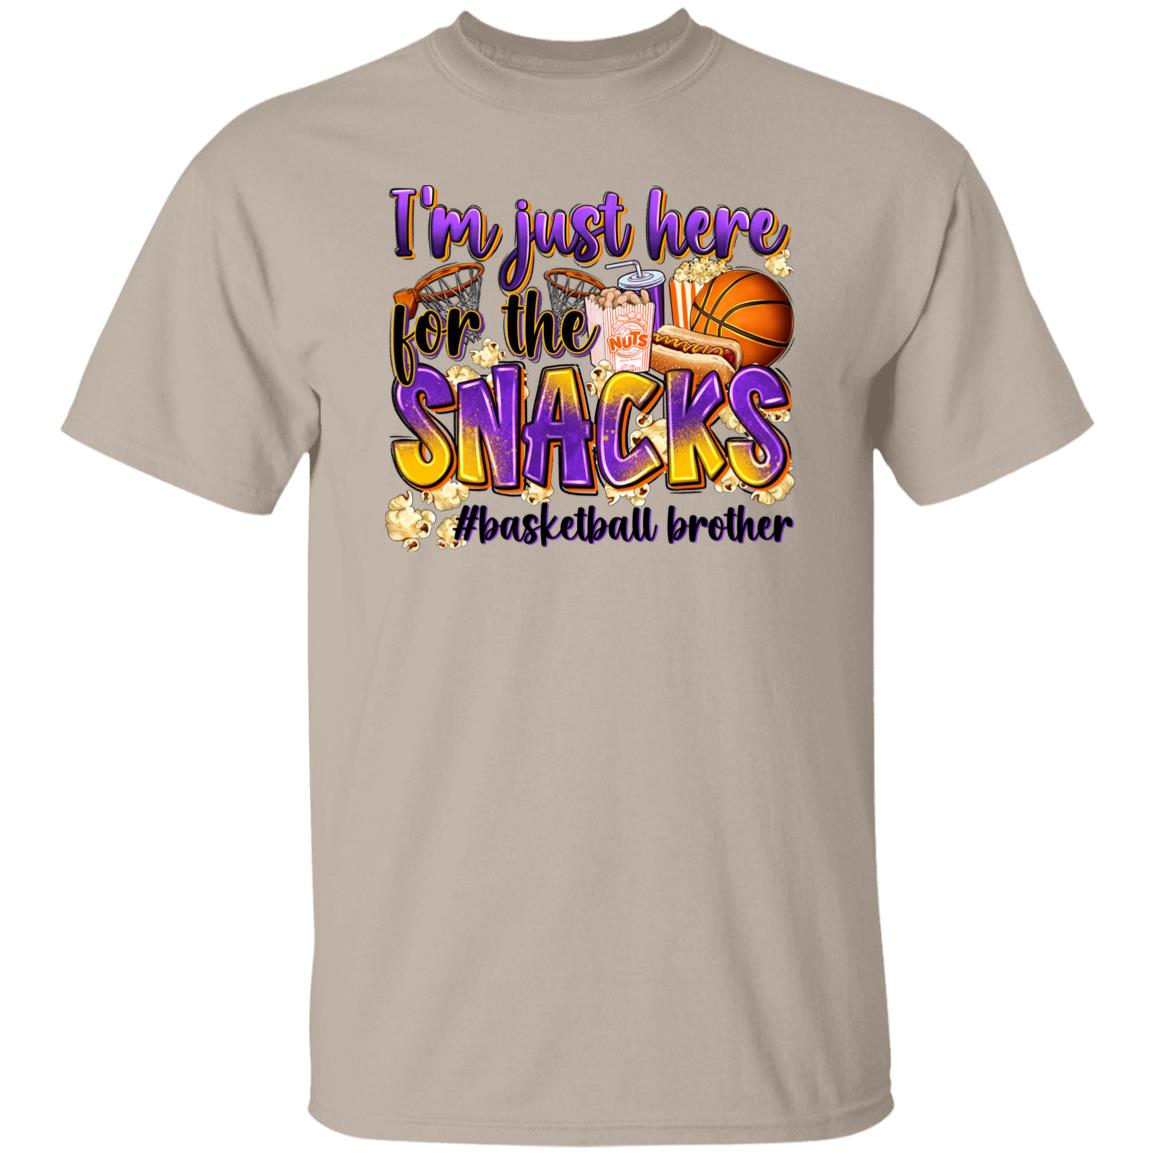 Basketball brother T-Shirt Basketball cheer I'm just here for the snacks Unisex Tee Sand White Sport Grey-Sand-Family-Gift-Planet